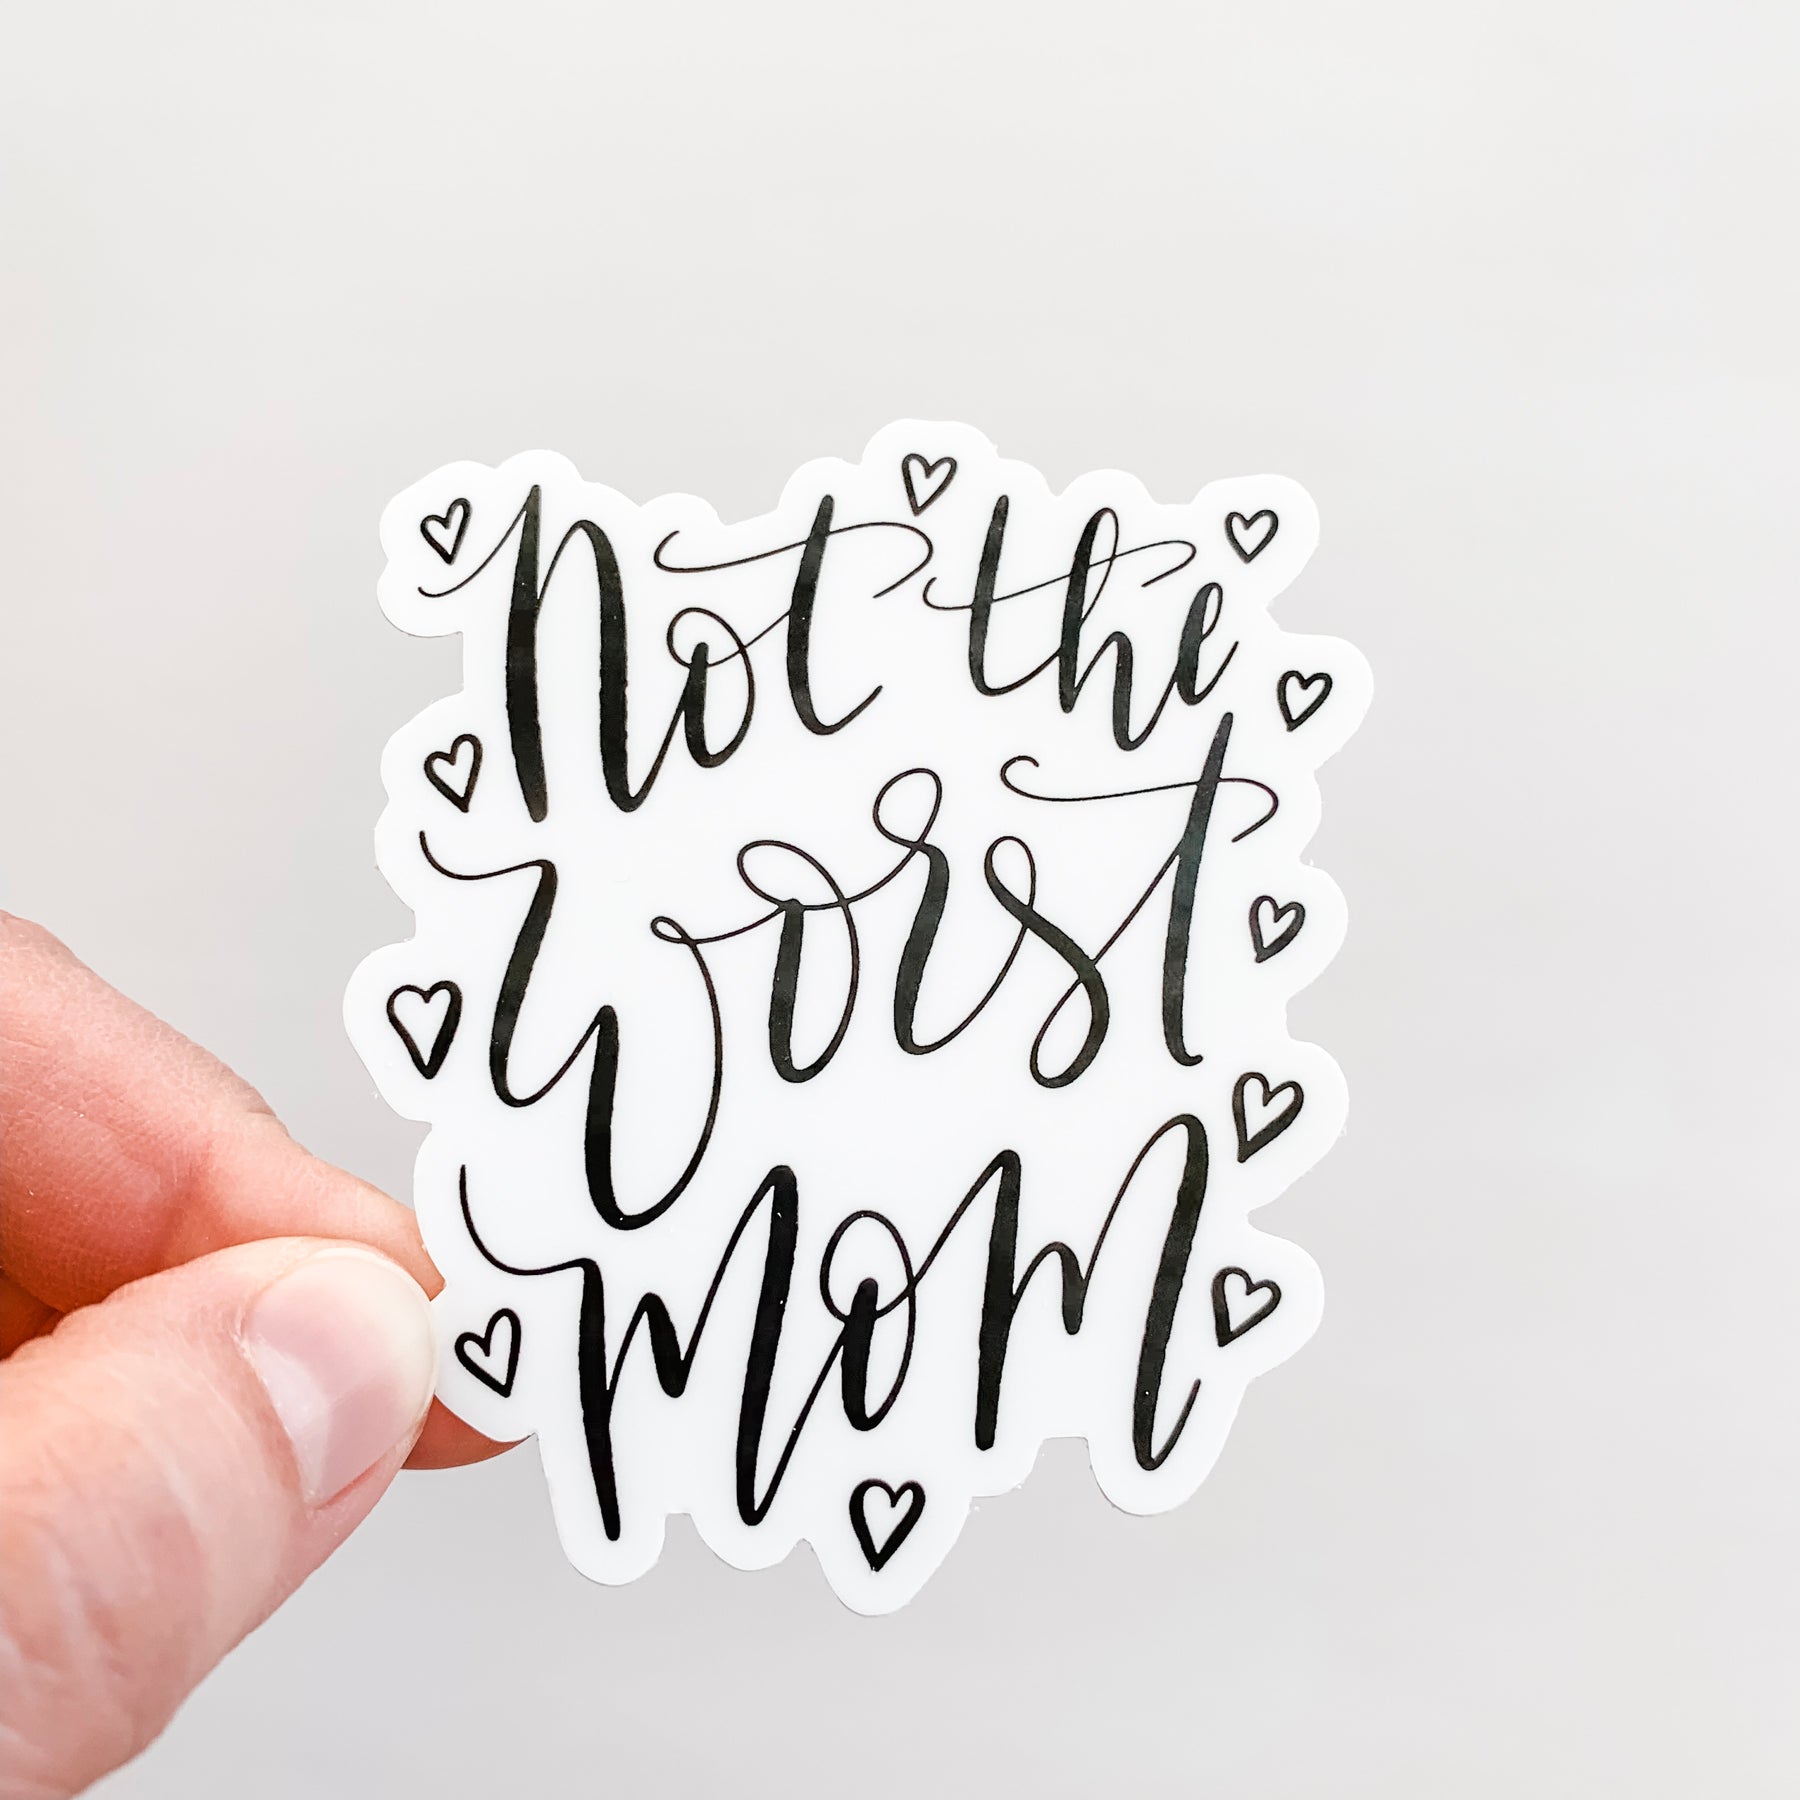 reusable stickers Archives - Mommys Trying